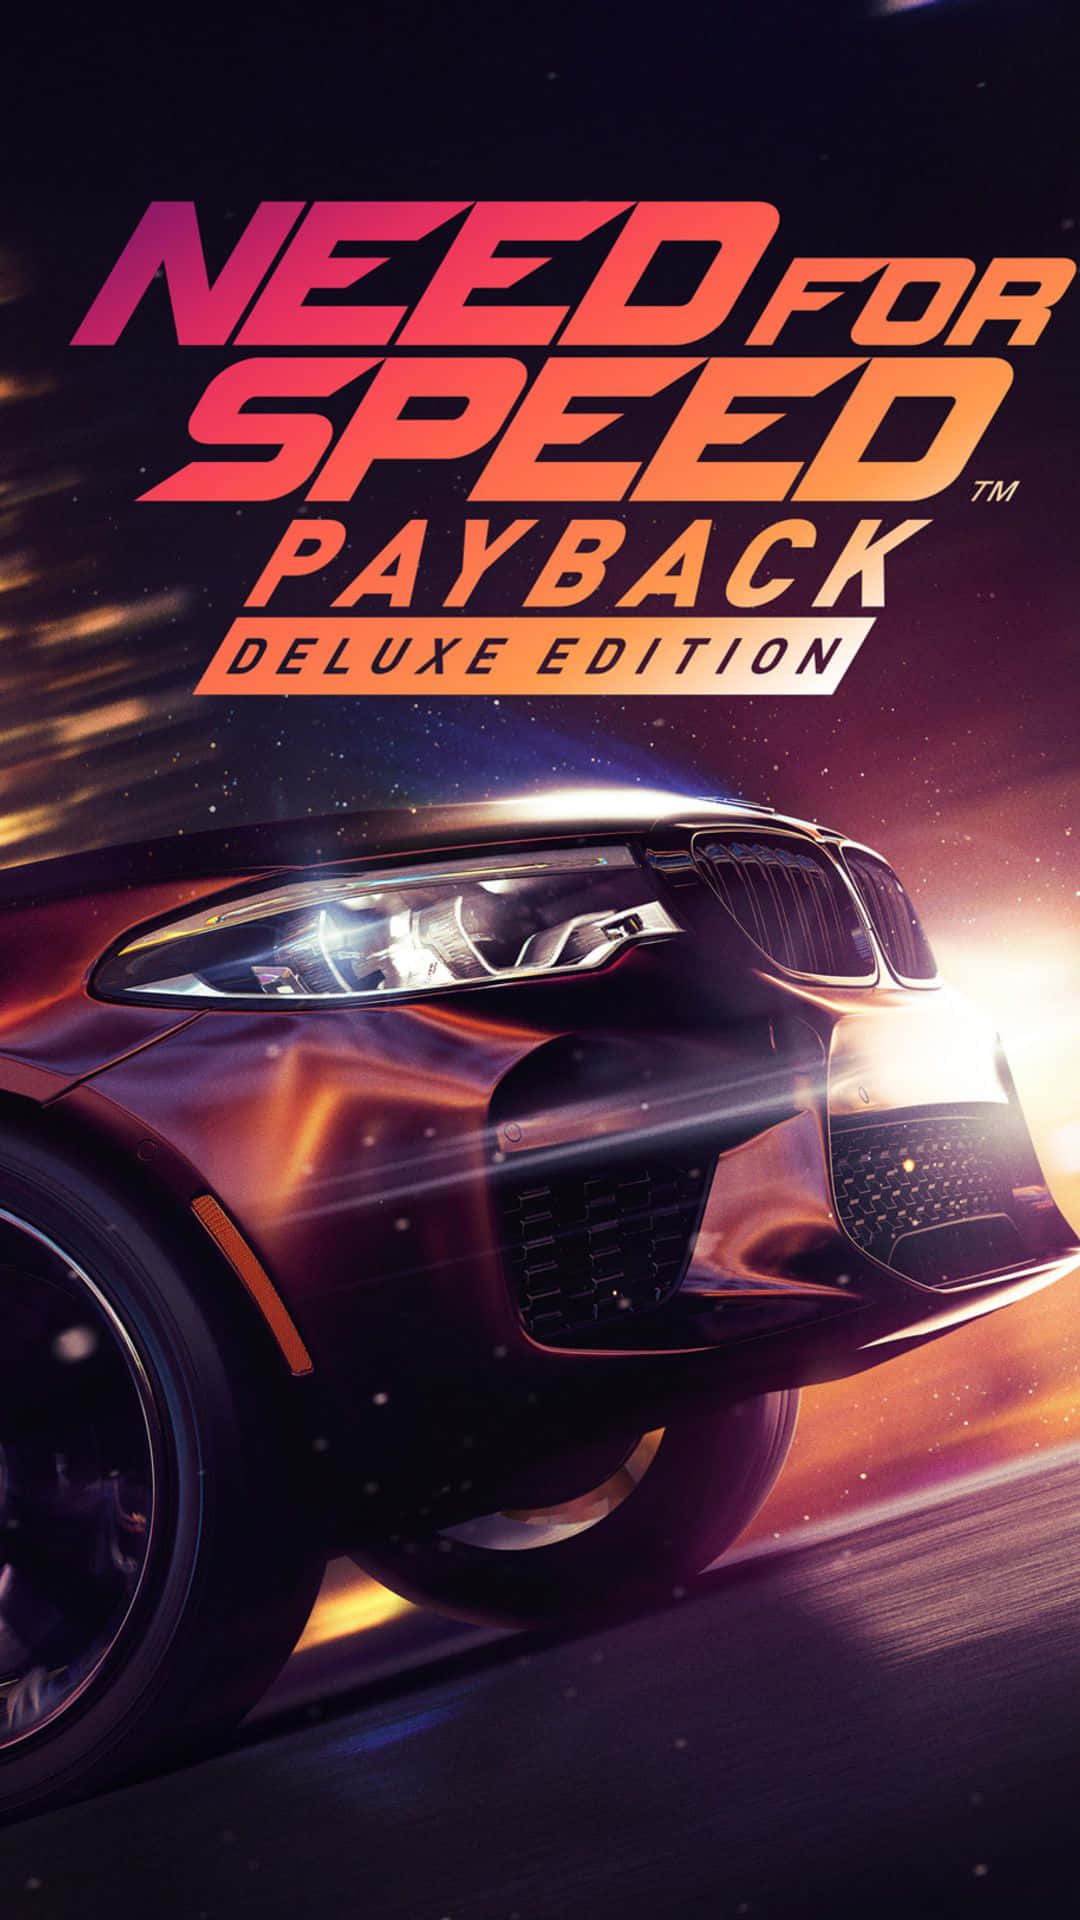 Captivating Night Race With The Need For Speed Payback